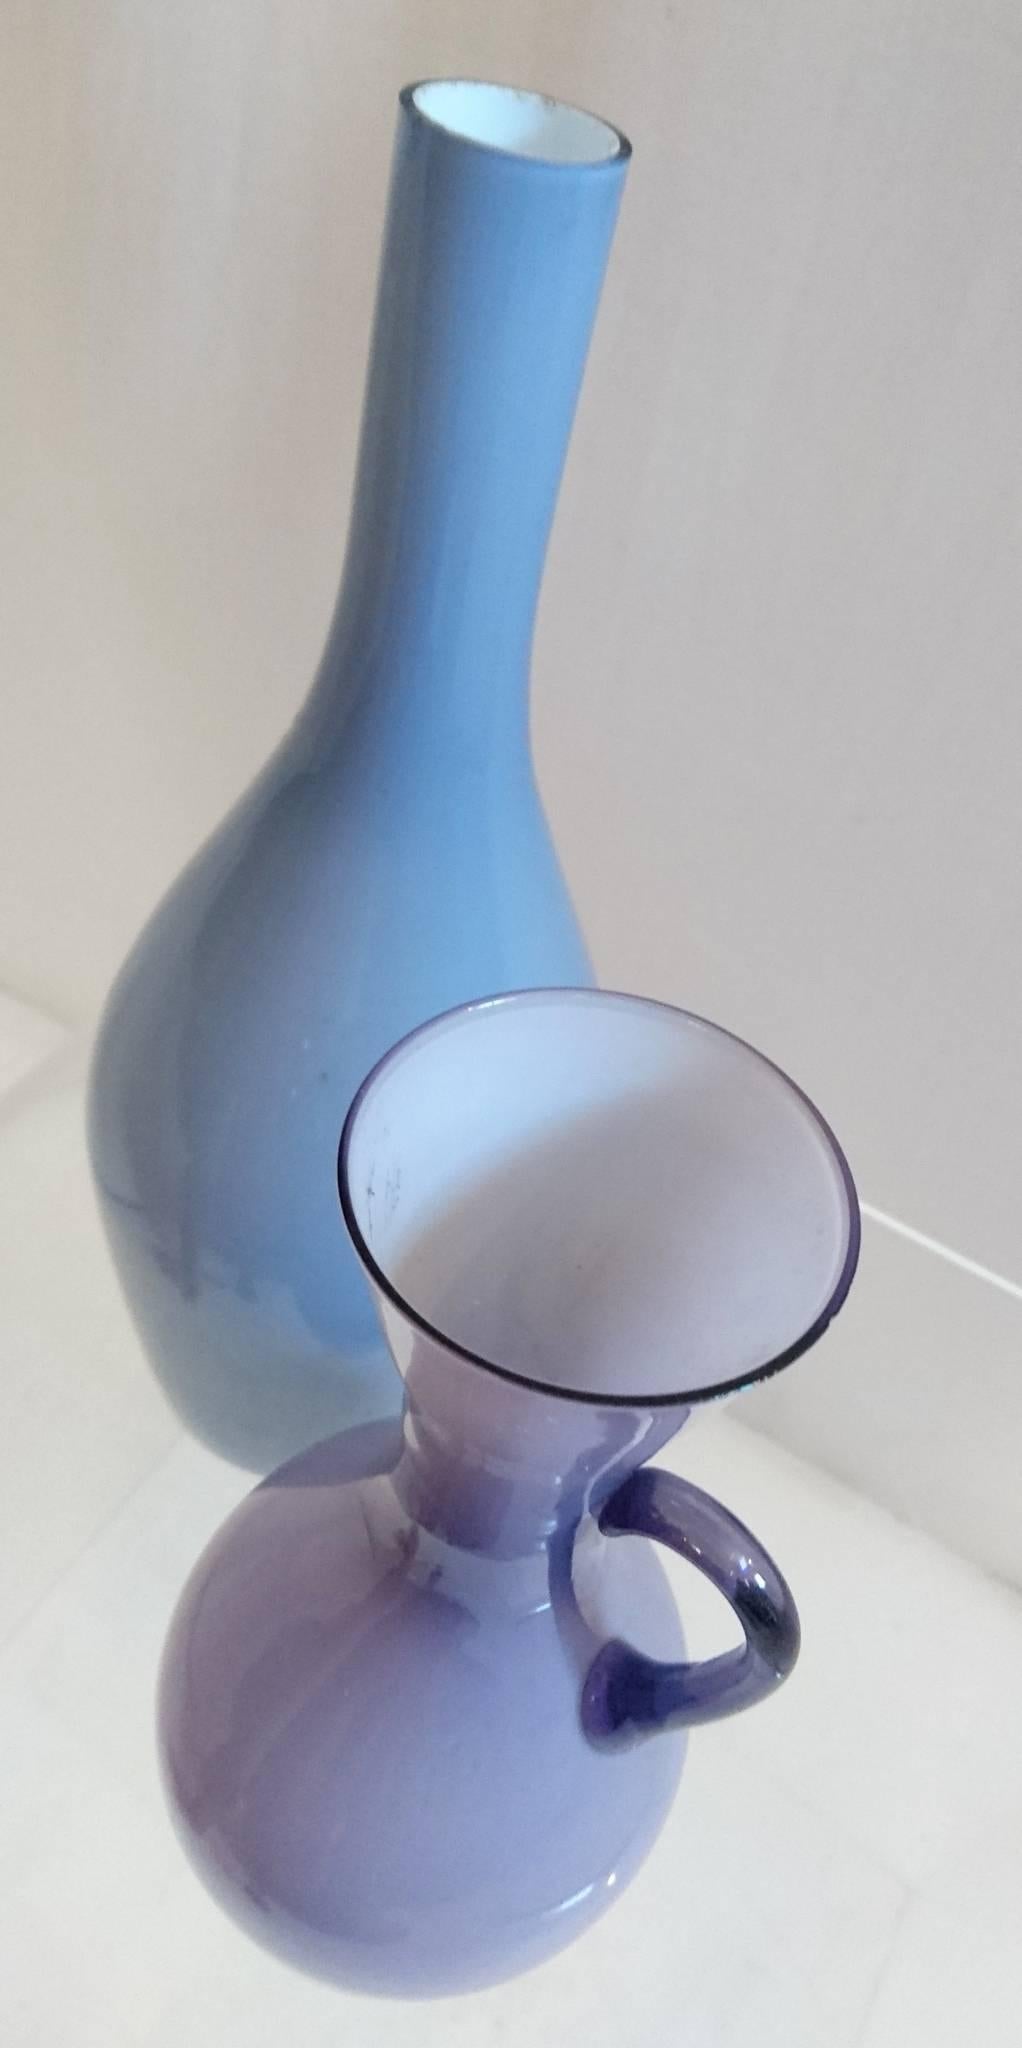 Two vases by Swedish glass manufacturer Ekenäs (now defunct) in two shades of purple opaline glass with white insides. One has a handle on the side.
Measure: The larger is 29 cm high and 10, in diameter and the smaller is 21 cm high and 9 in